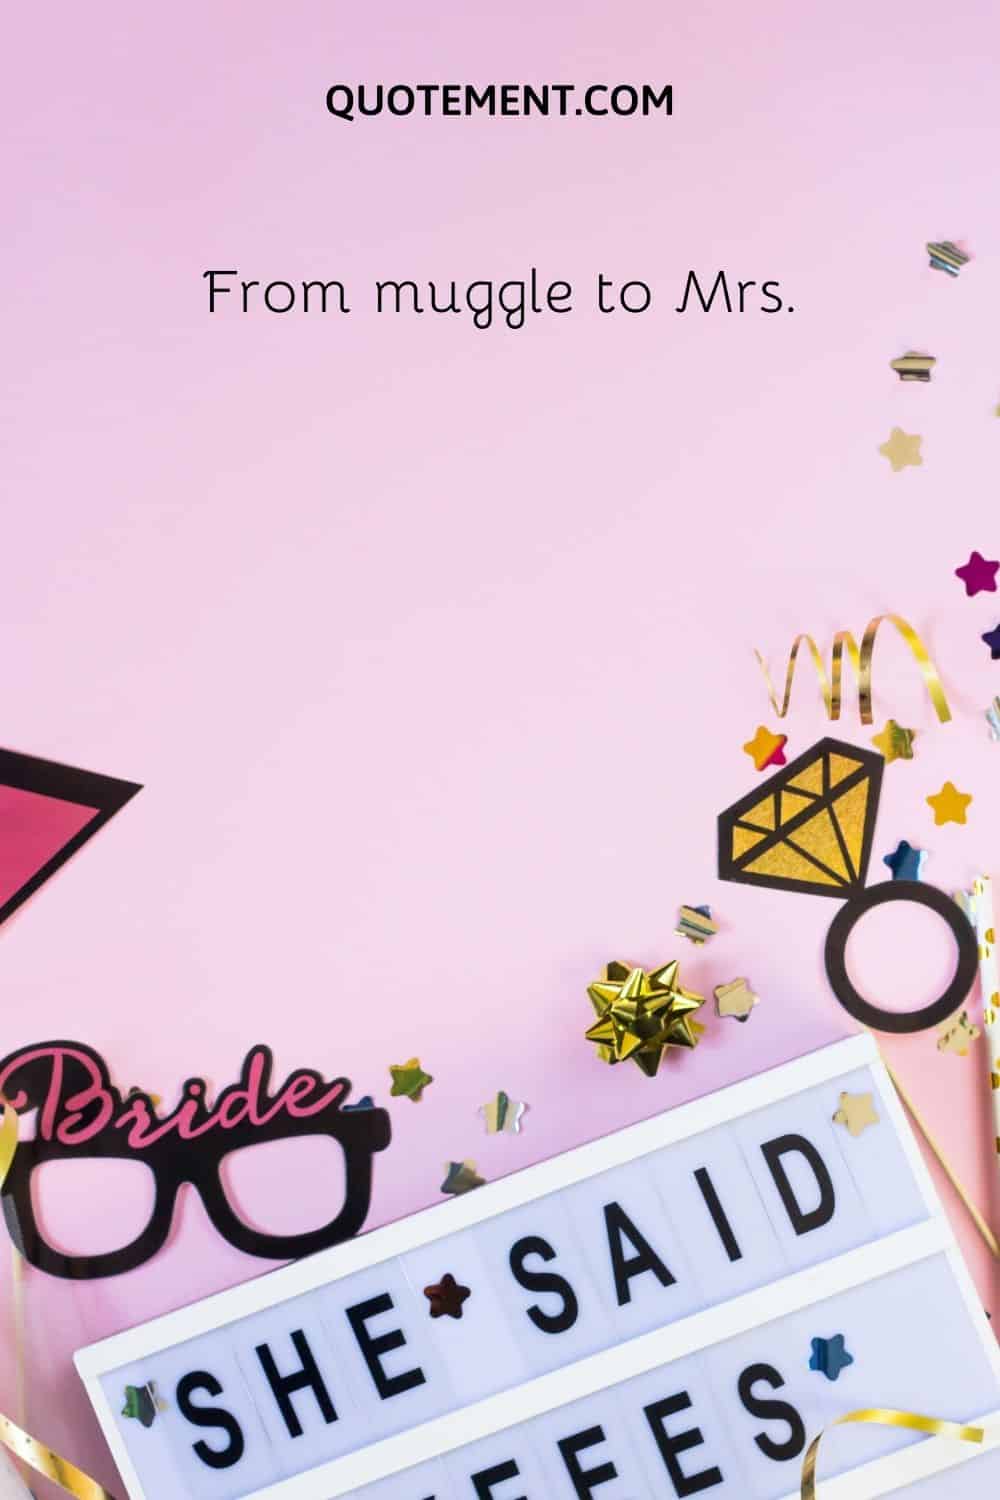 From muggle to Mrs.